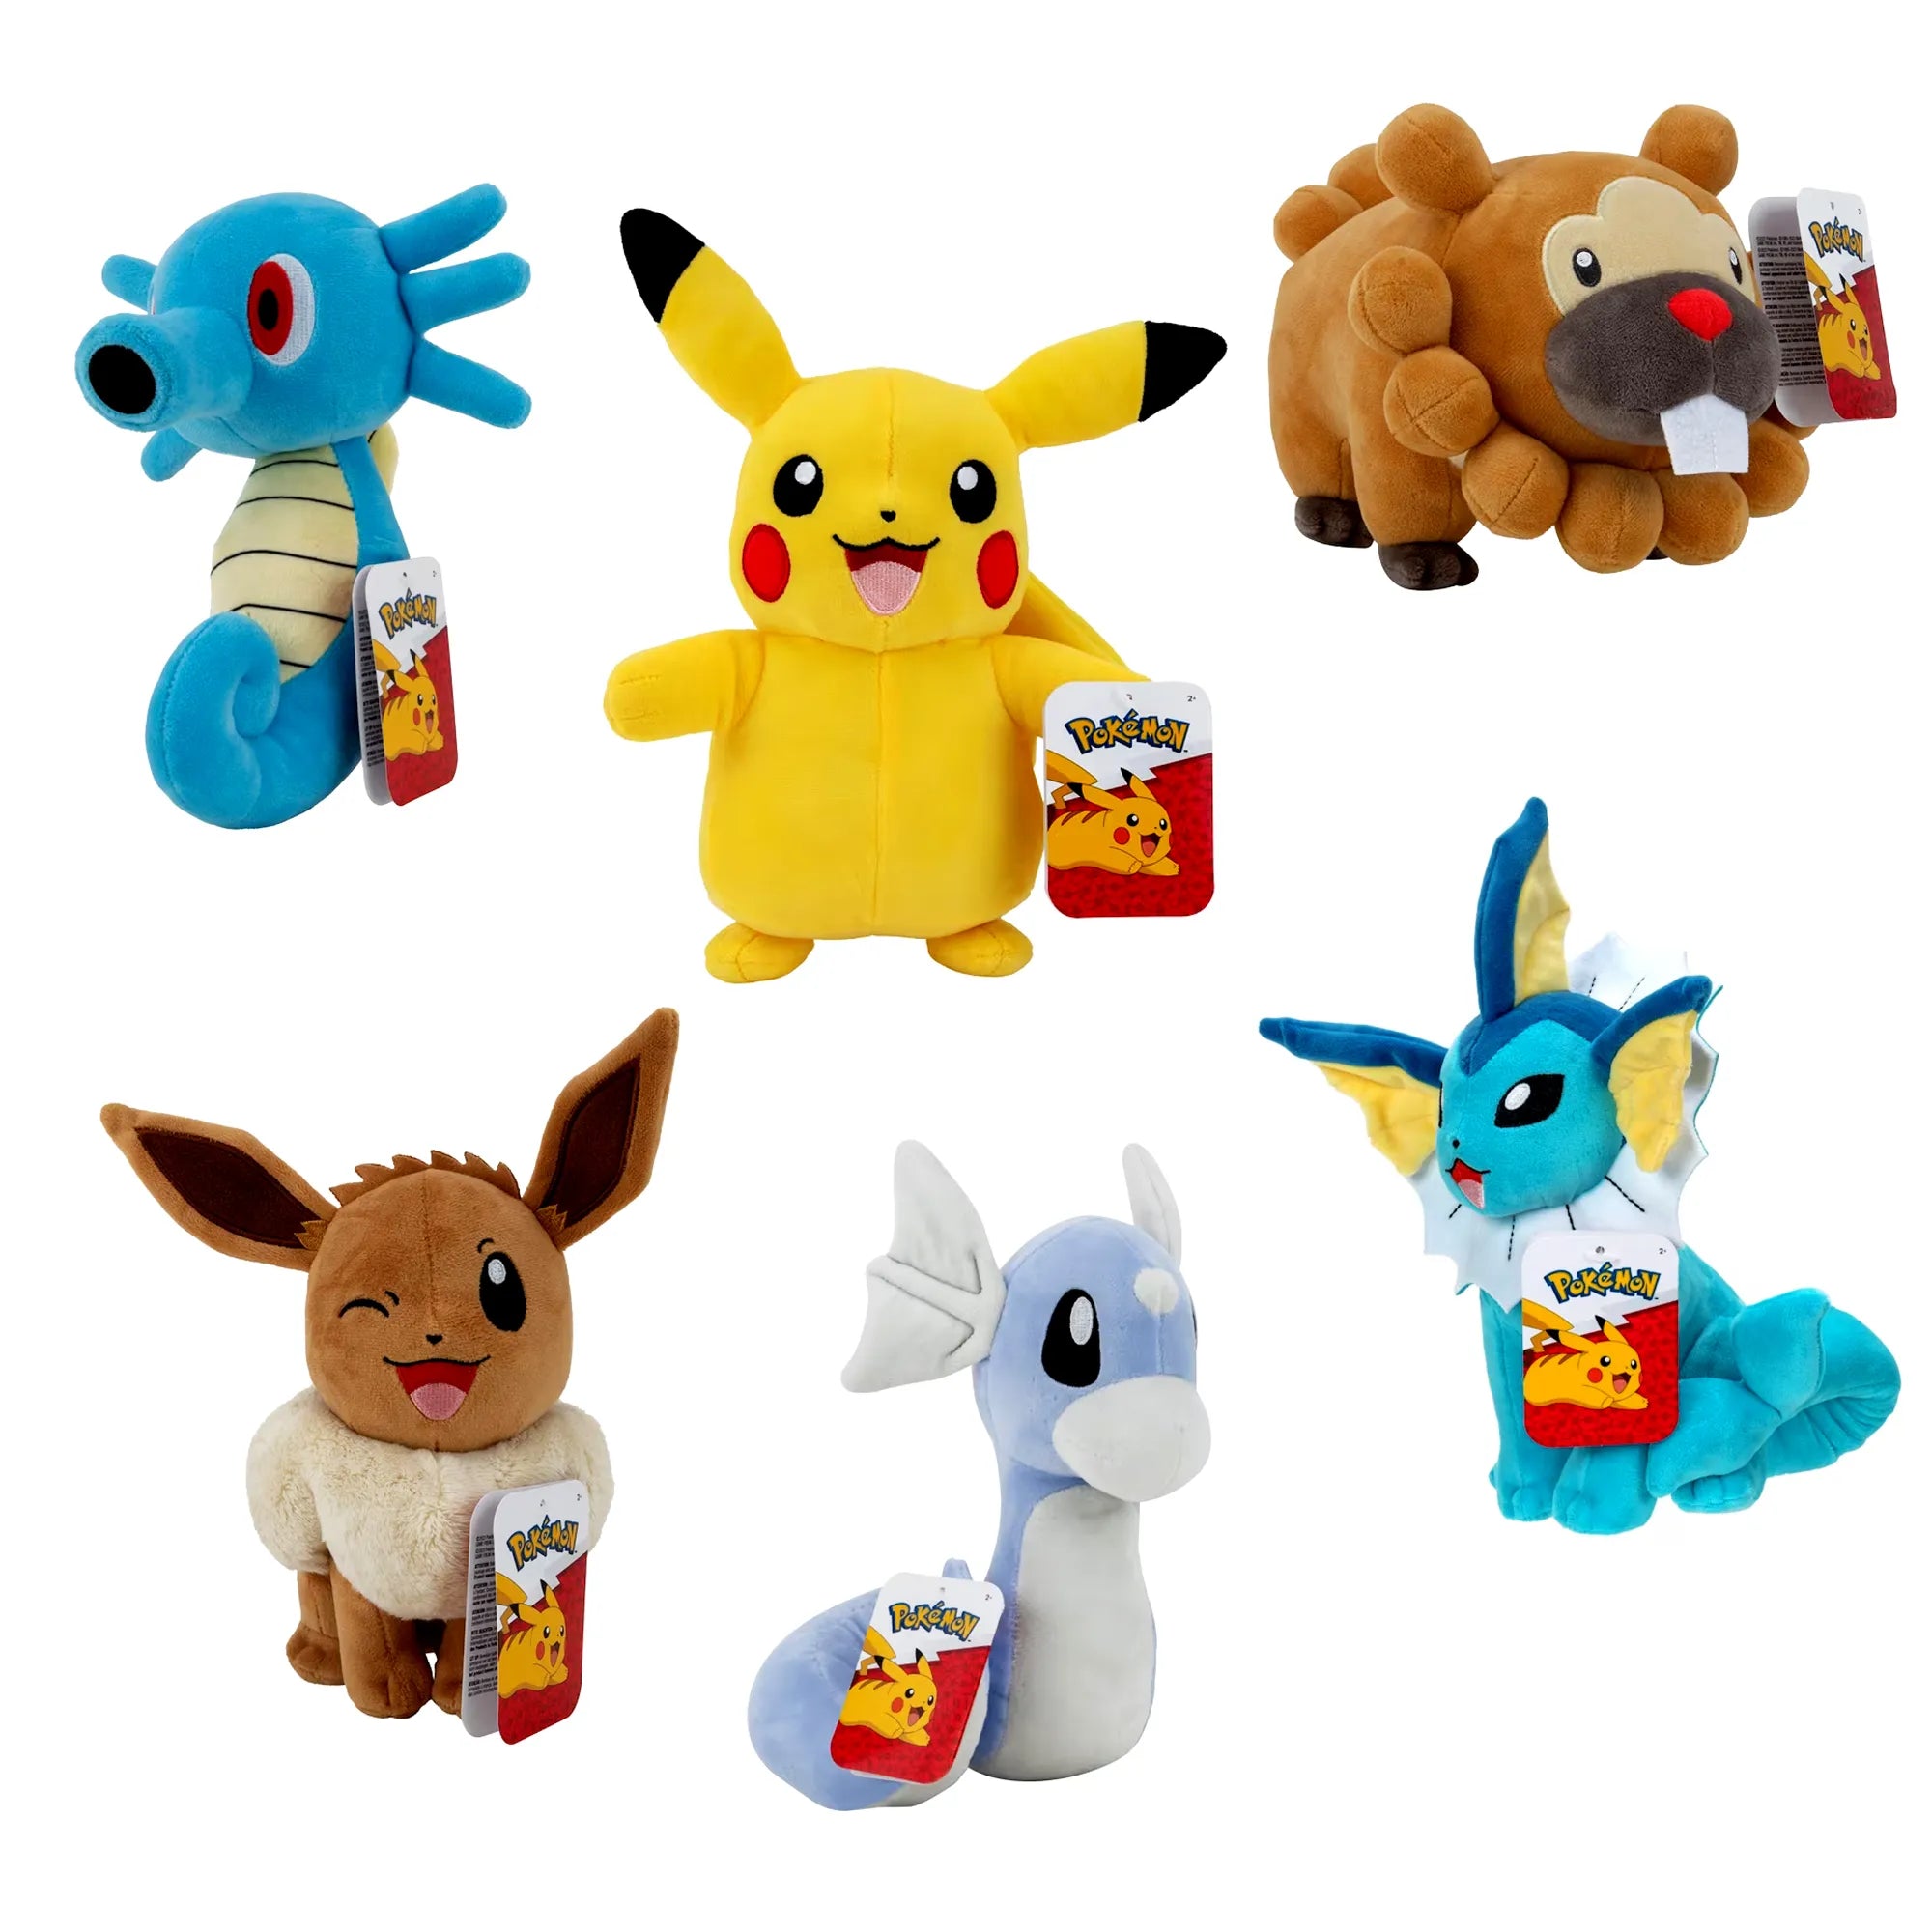 Pokémon 8” Specialty Plush 6-Pack Value Bundle - Age 2+ - Brown's Hobby & Game